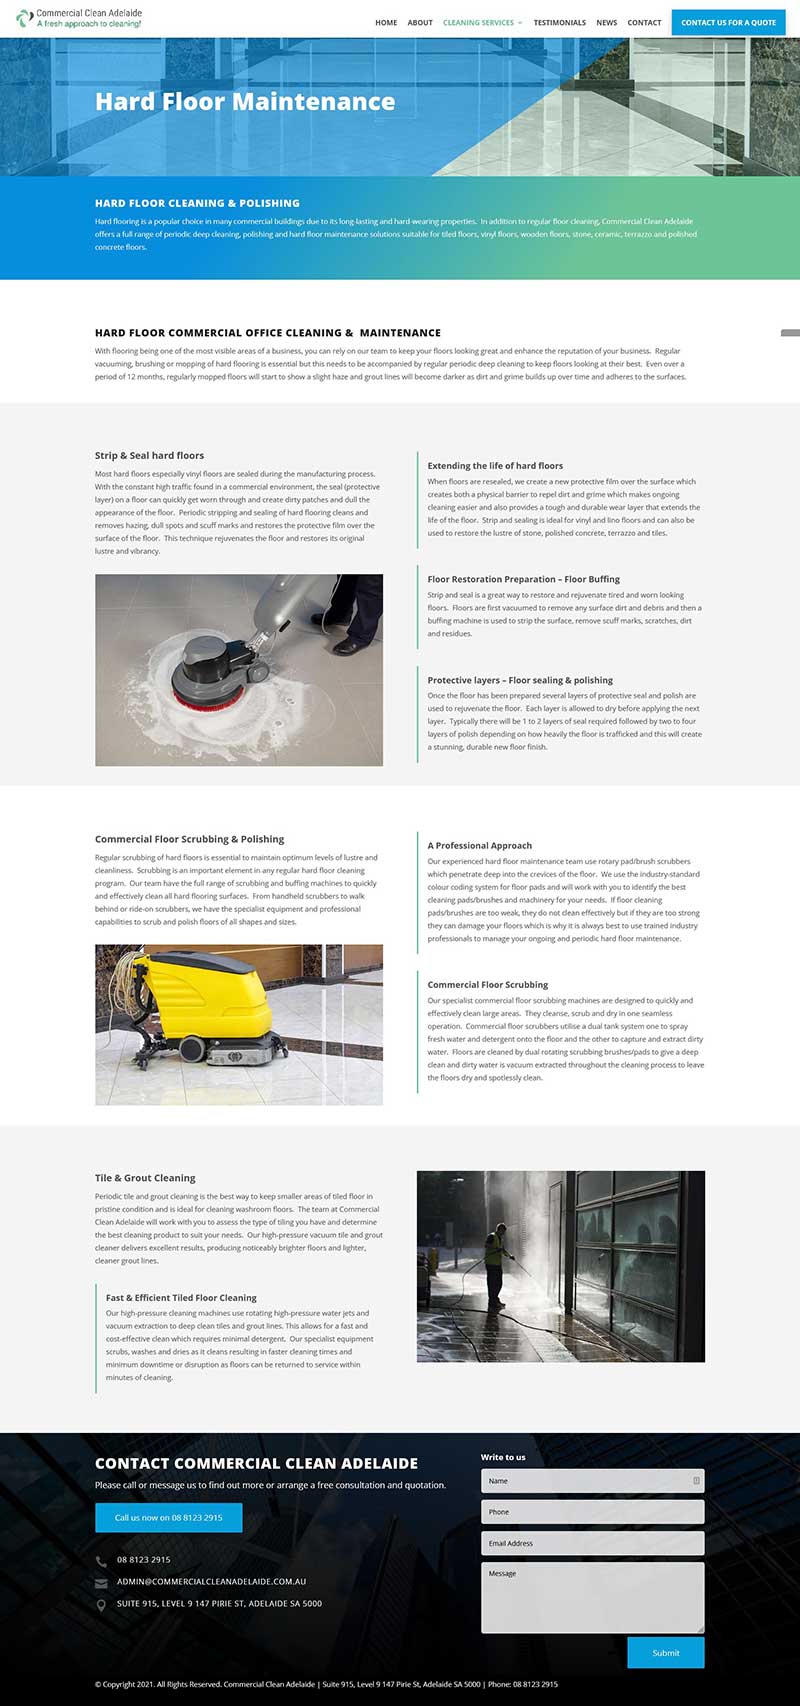 website design in adelaide for commercial cleaning business